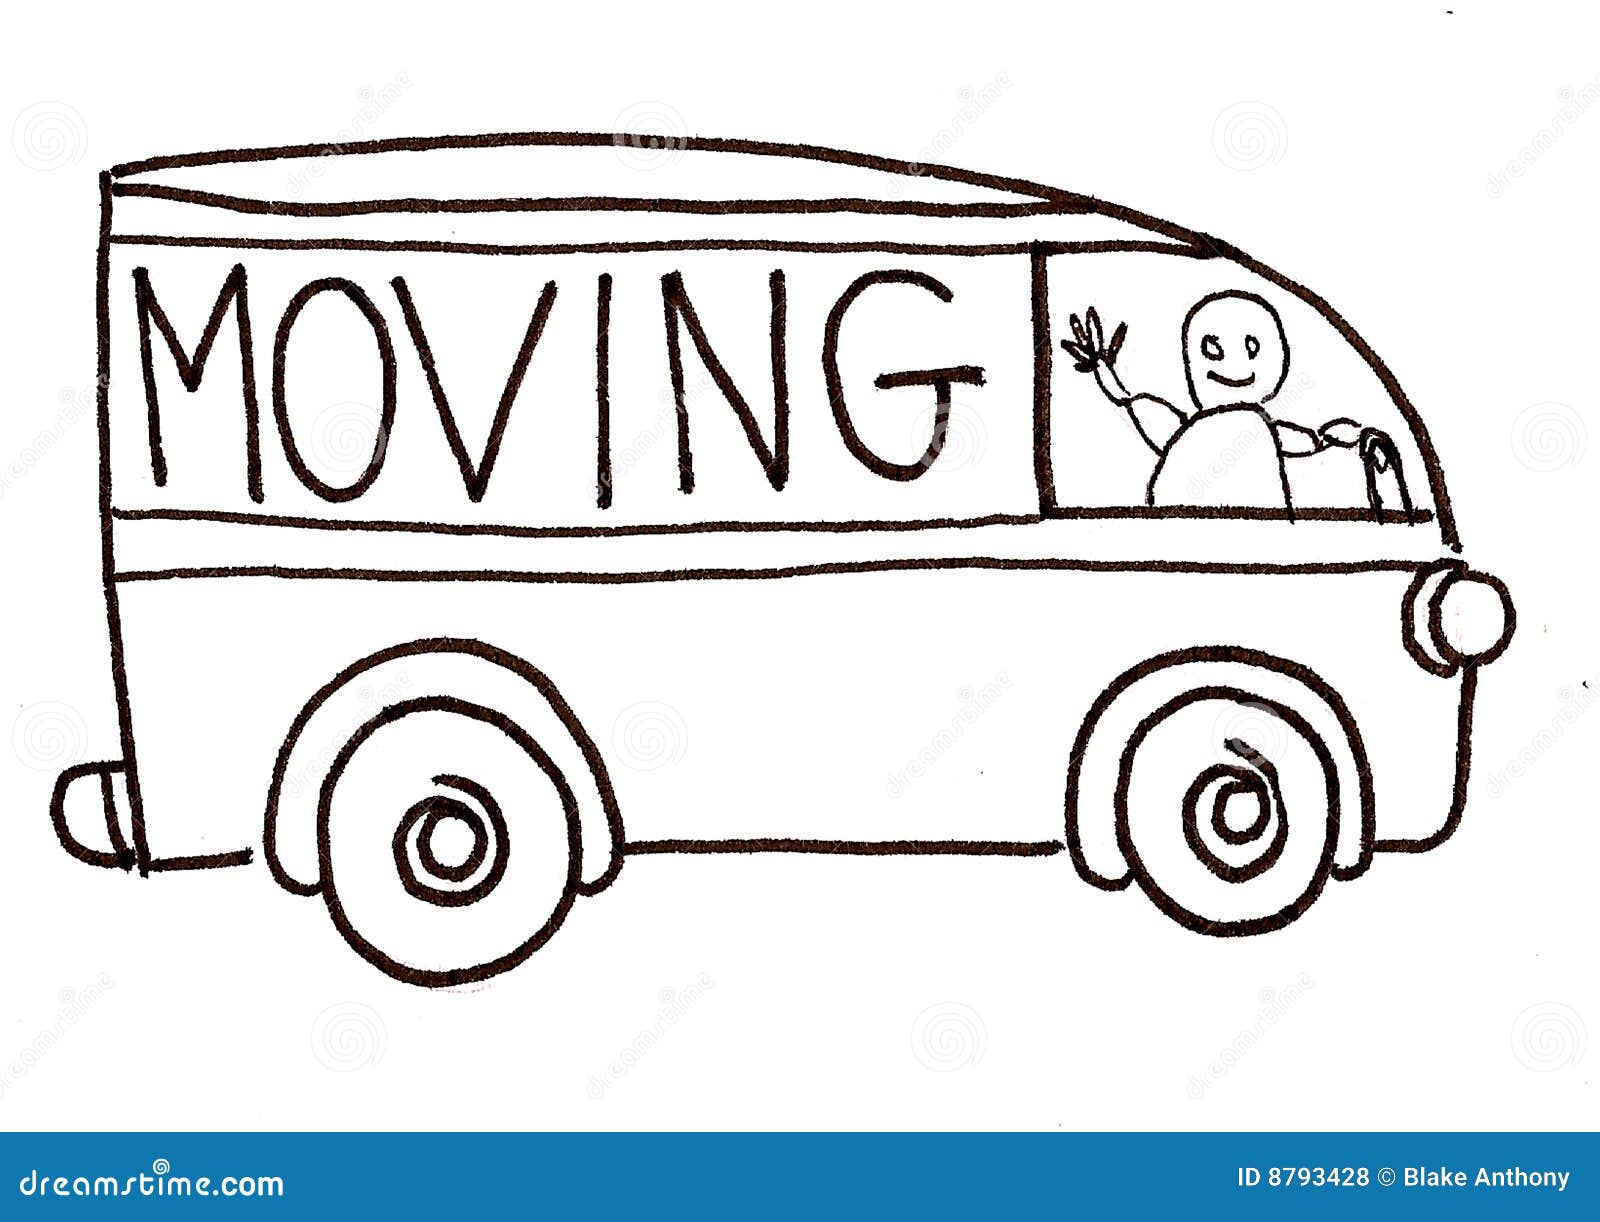 family moving clipart - photo #49